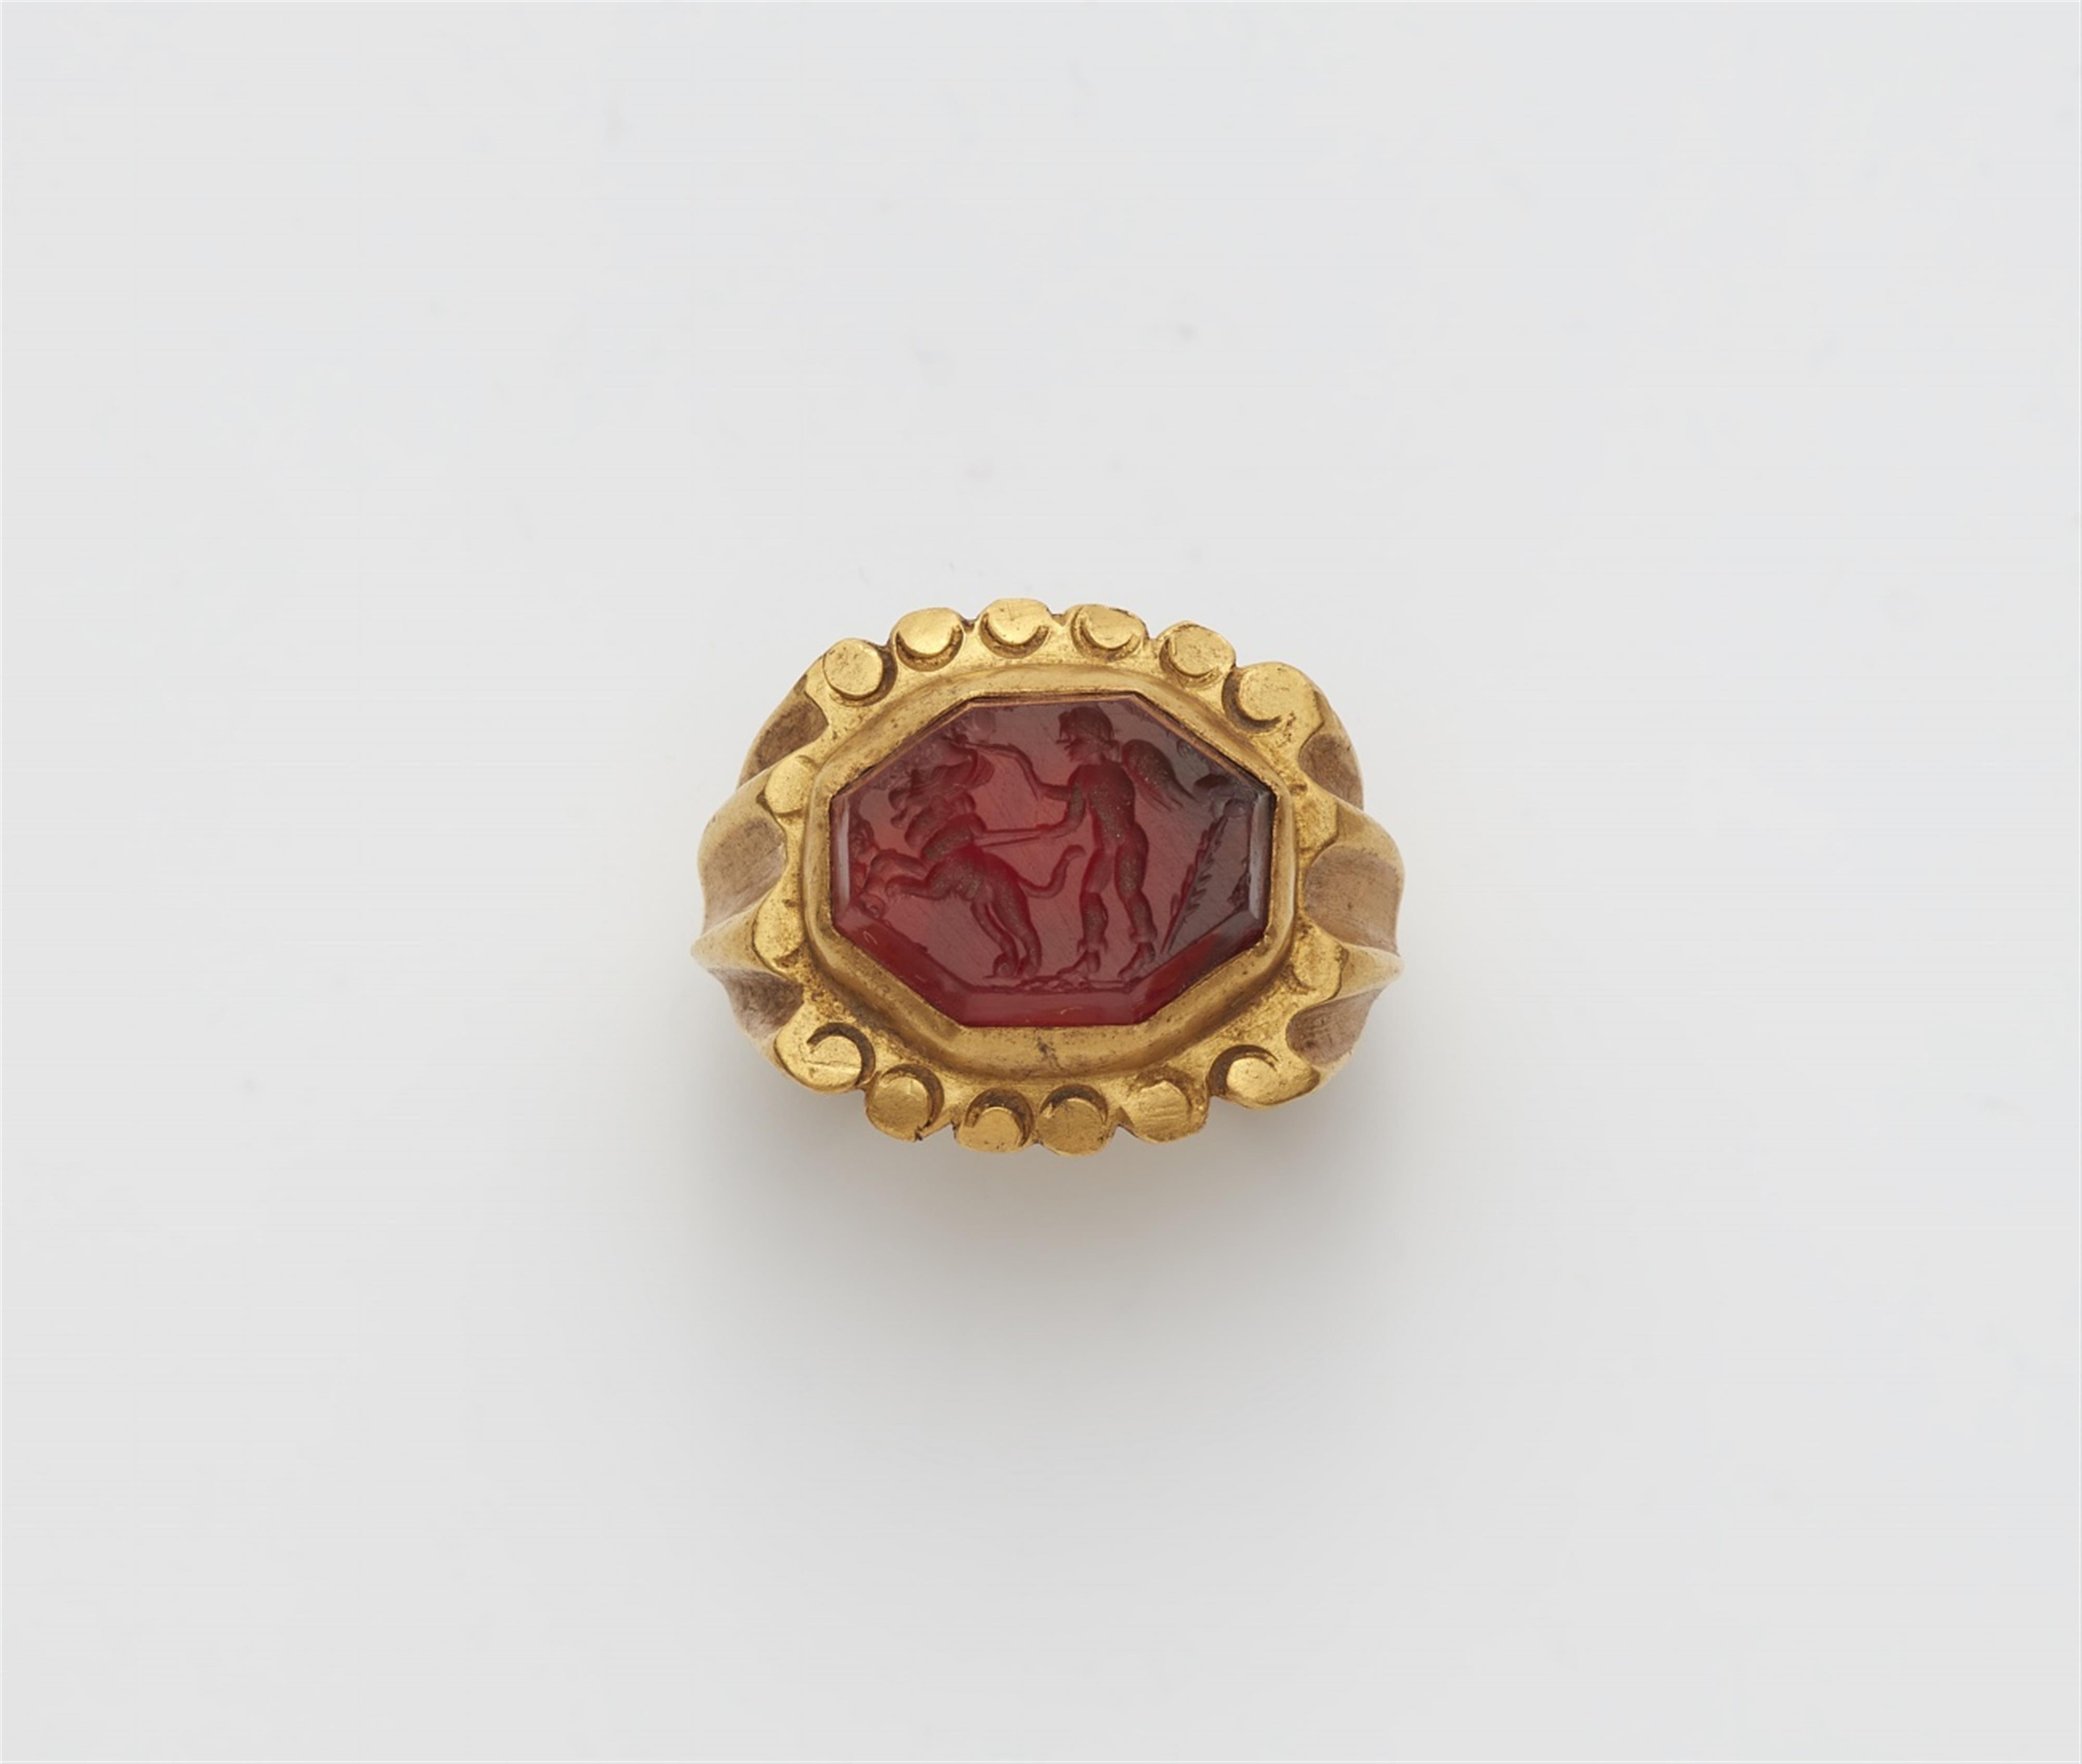 A 21k gold ring with a Roman intaglio - image-1